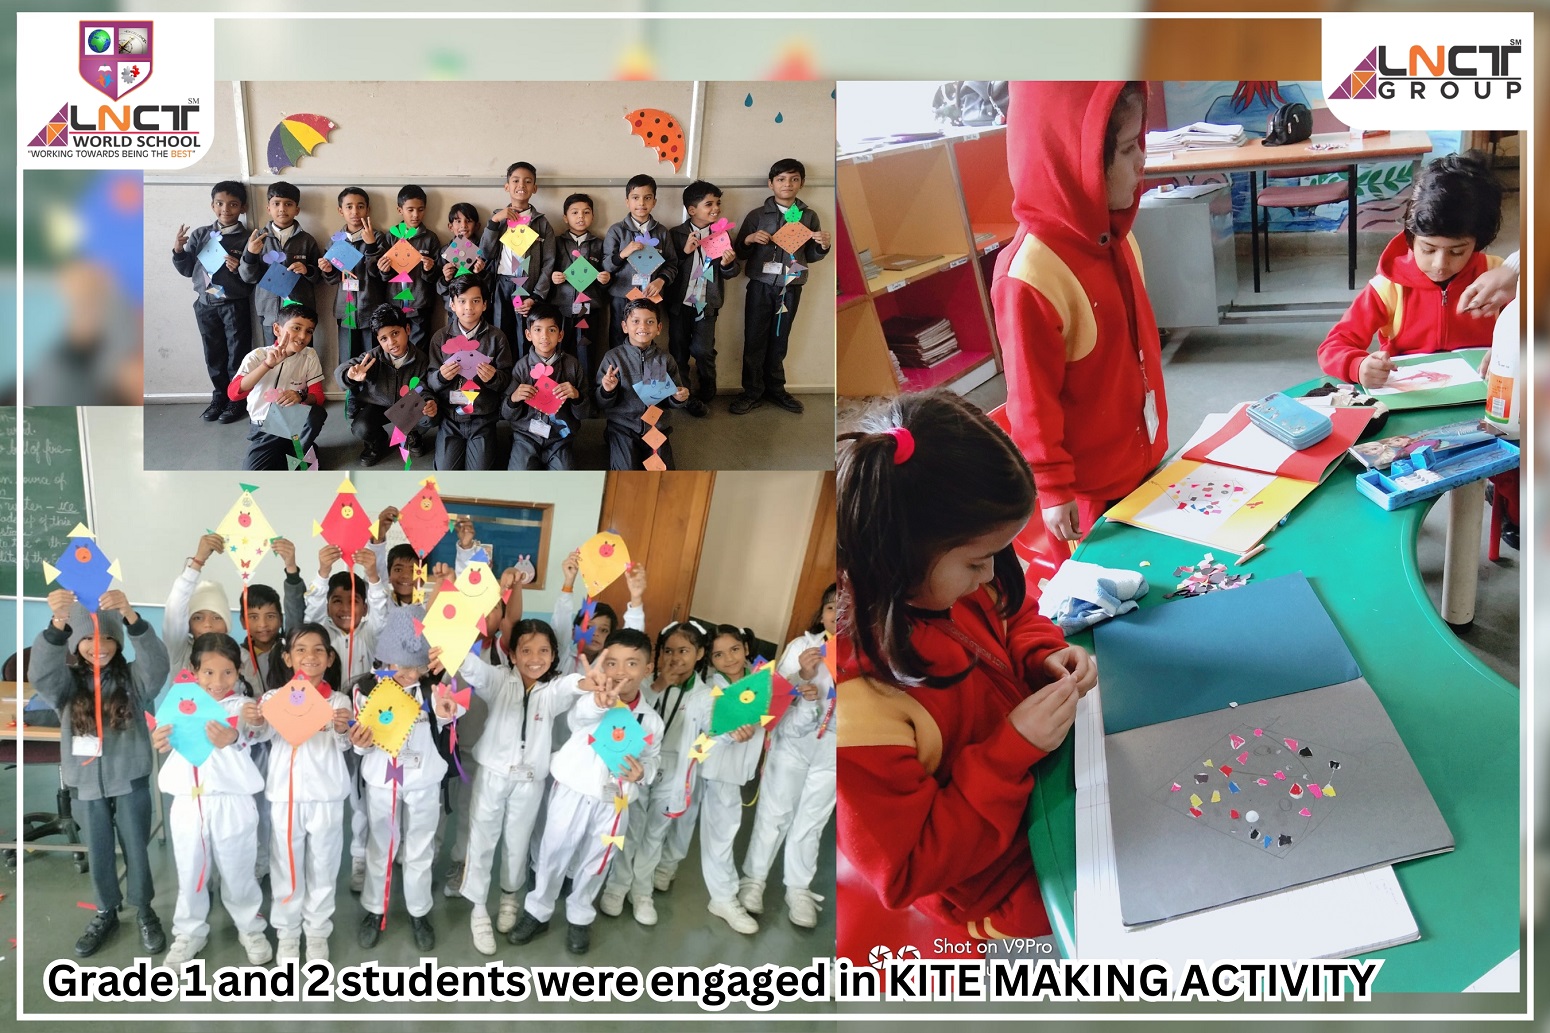 LNCT WORLD SCHOOL performed creative activity. Grade 1 and 2 students were engaged in KITE MAKING ACTIVITY